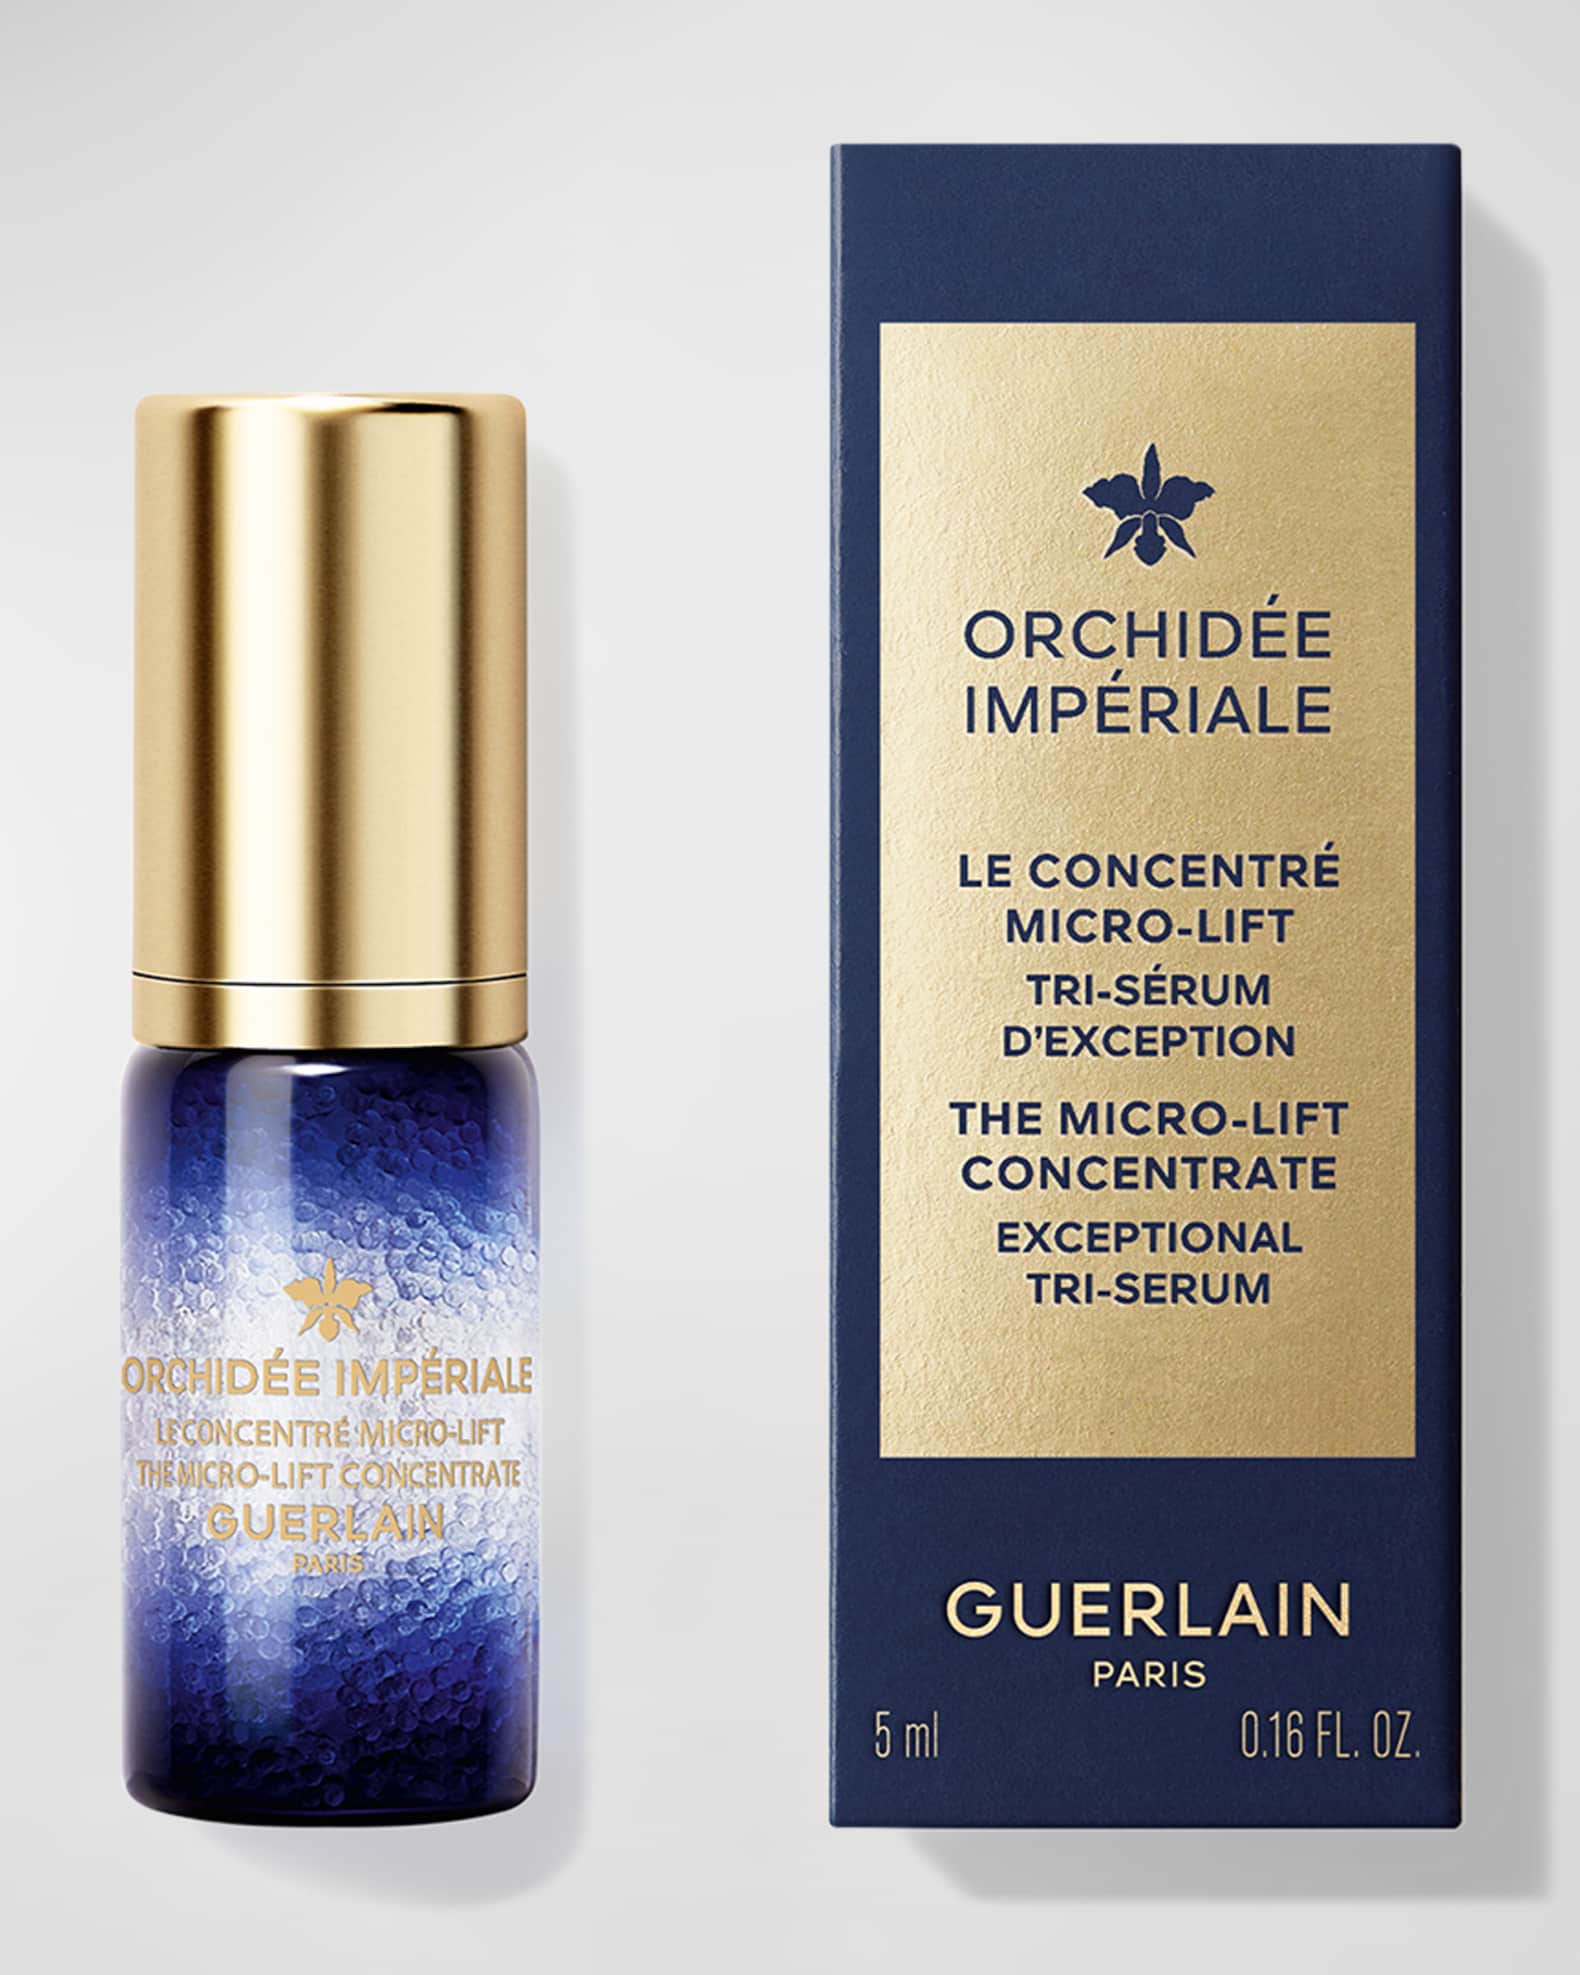 Guerlain Orchidee Imperiale Microlift Concentrate Serum, 5 mL - Yours with  any $150 GUERLAIN Purchase